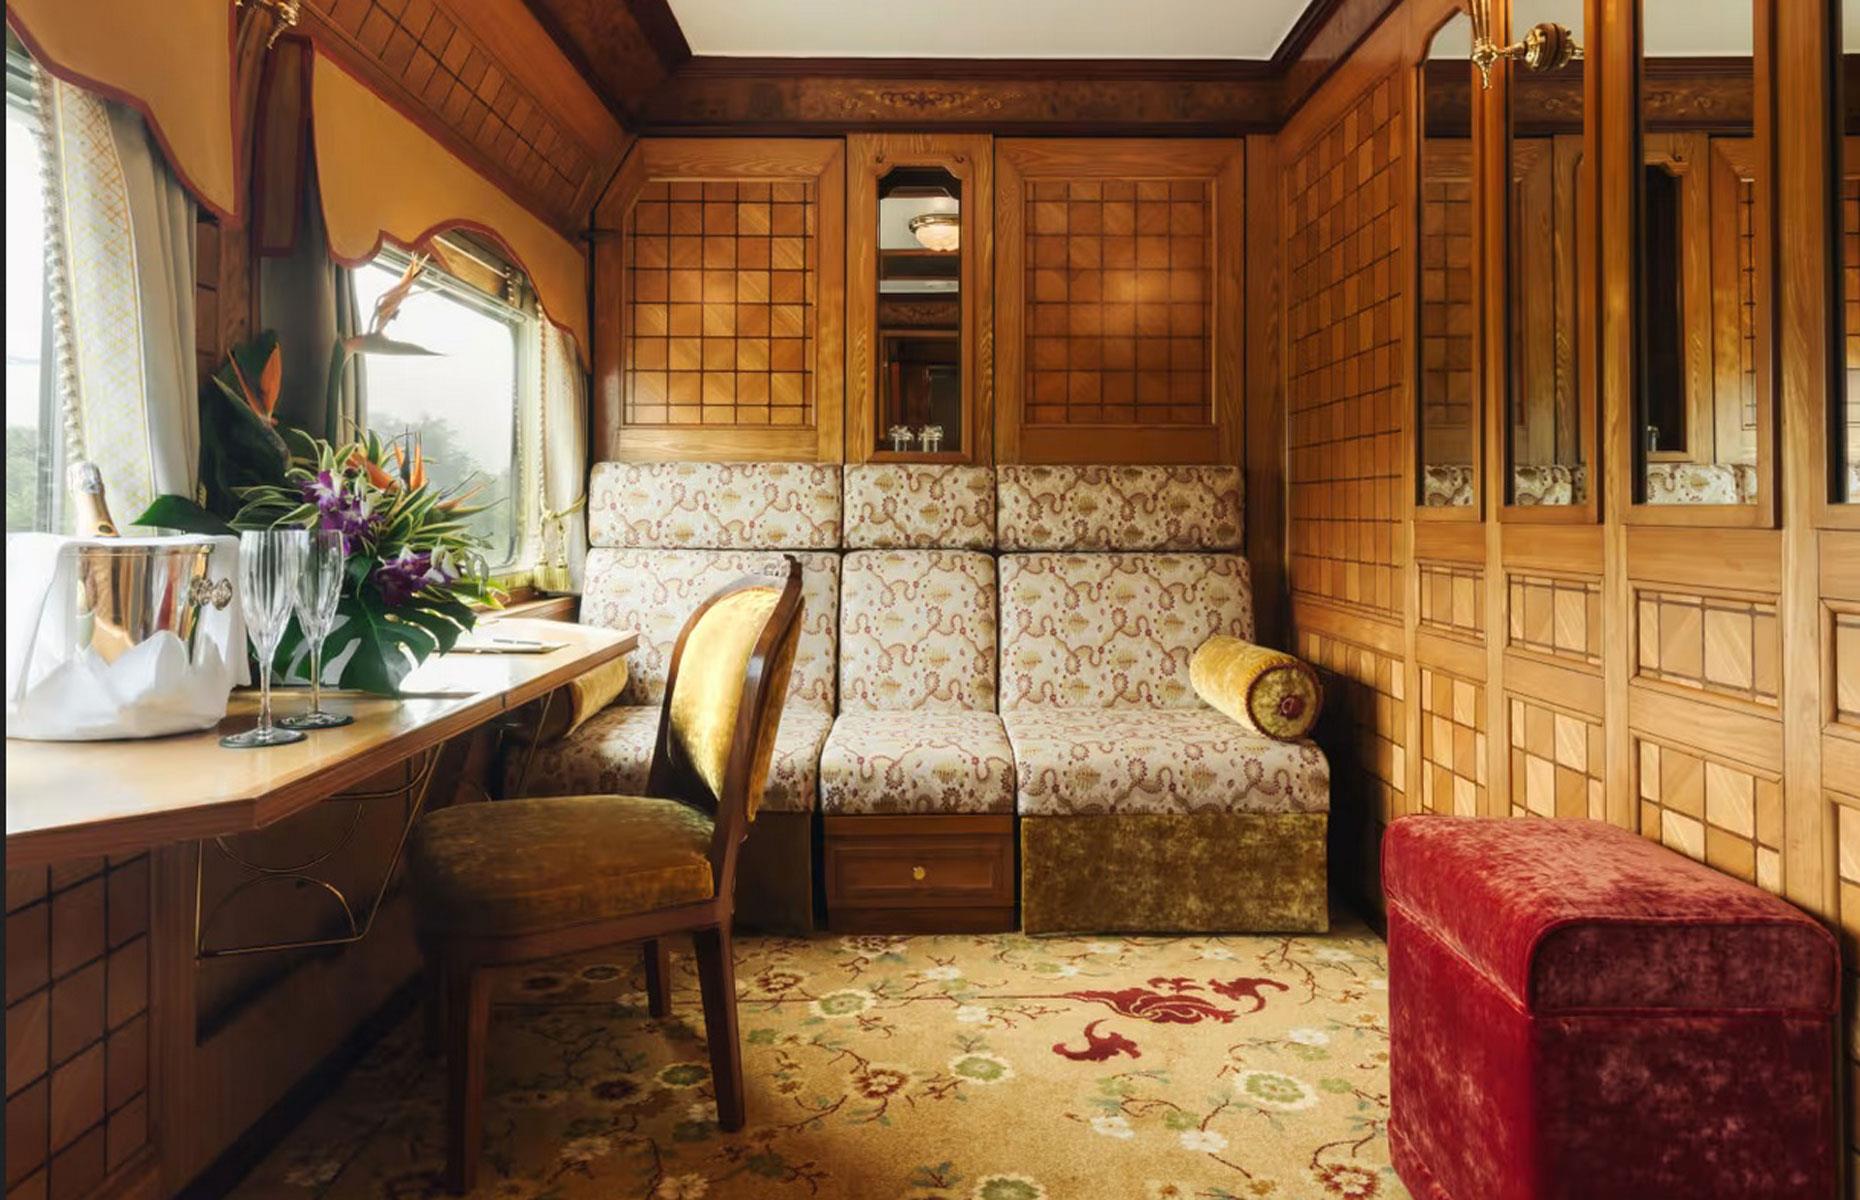 <p>The <em>Eastern & Oriental Express</em> offers two four-day, three-night trips departing from Singapore that explore Malaysia. Guests will get to relish gourmet local dishes, while artisans, musicians, and storytellers will be on board to provide immersive cultural experiences.</p>  <p>The 125-square-foot (12 square metre) Presidential Suite is the most expensive option. Supremely comfortable, it features a large ensuite bathroom, top-class amenities, and superlative service, with caviar on arrival and champagne on tap.</p>  <p>Both trips start from $8,600 (£6,767) per person based on double occupancy or $17,200 (£13,533) for a single, which works out to $2,867 (£2,256) and $5,733 (£4,511) per night respectively.</p>